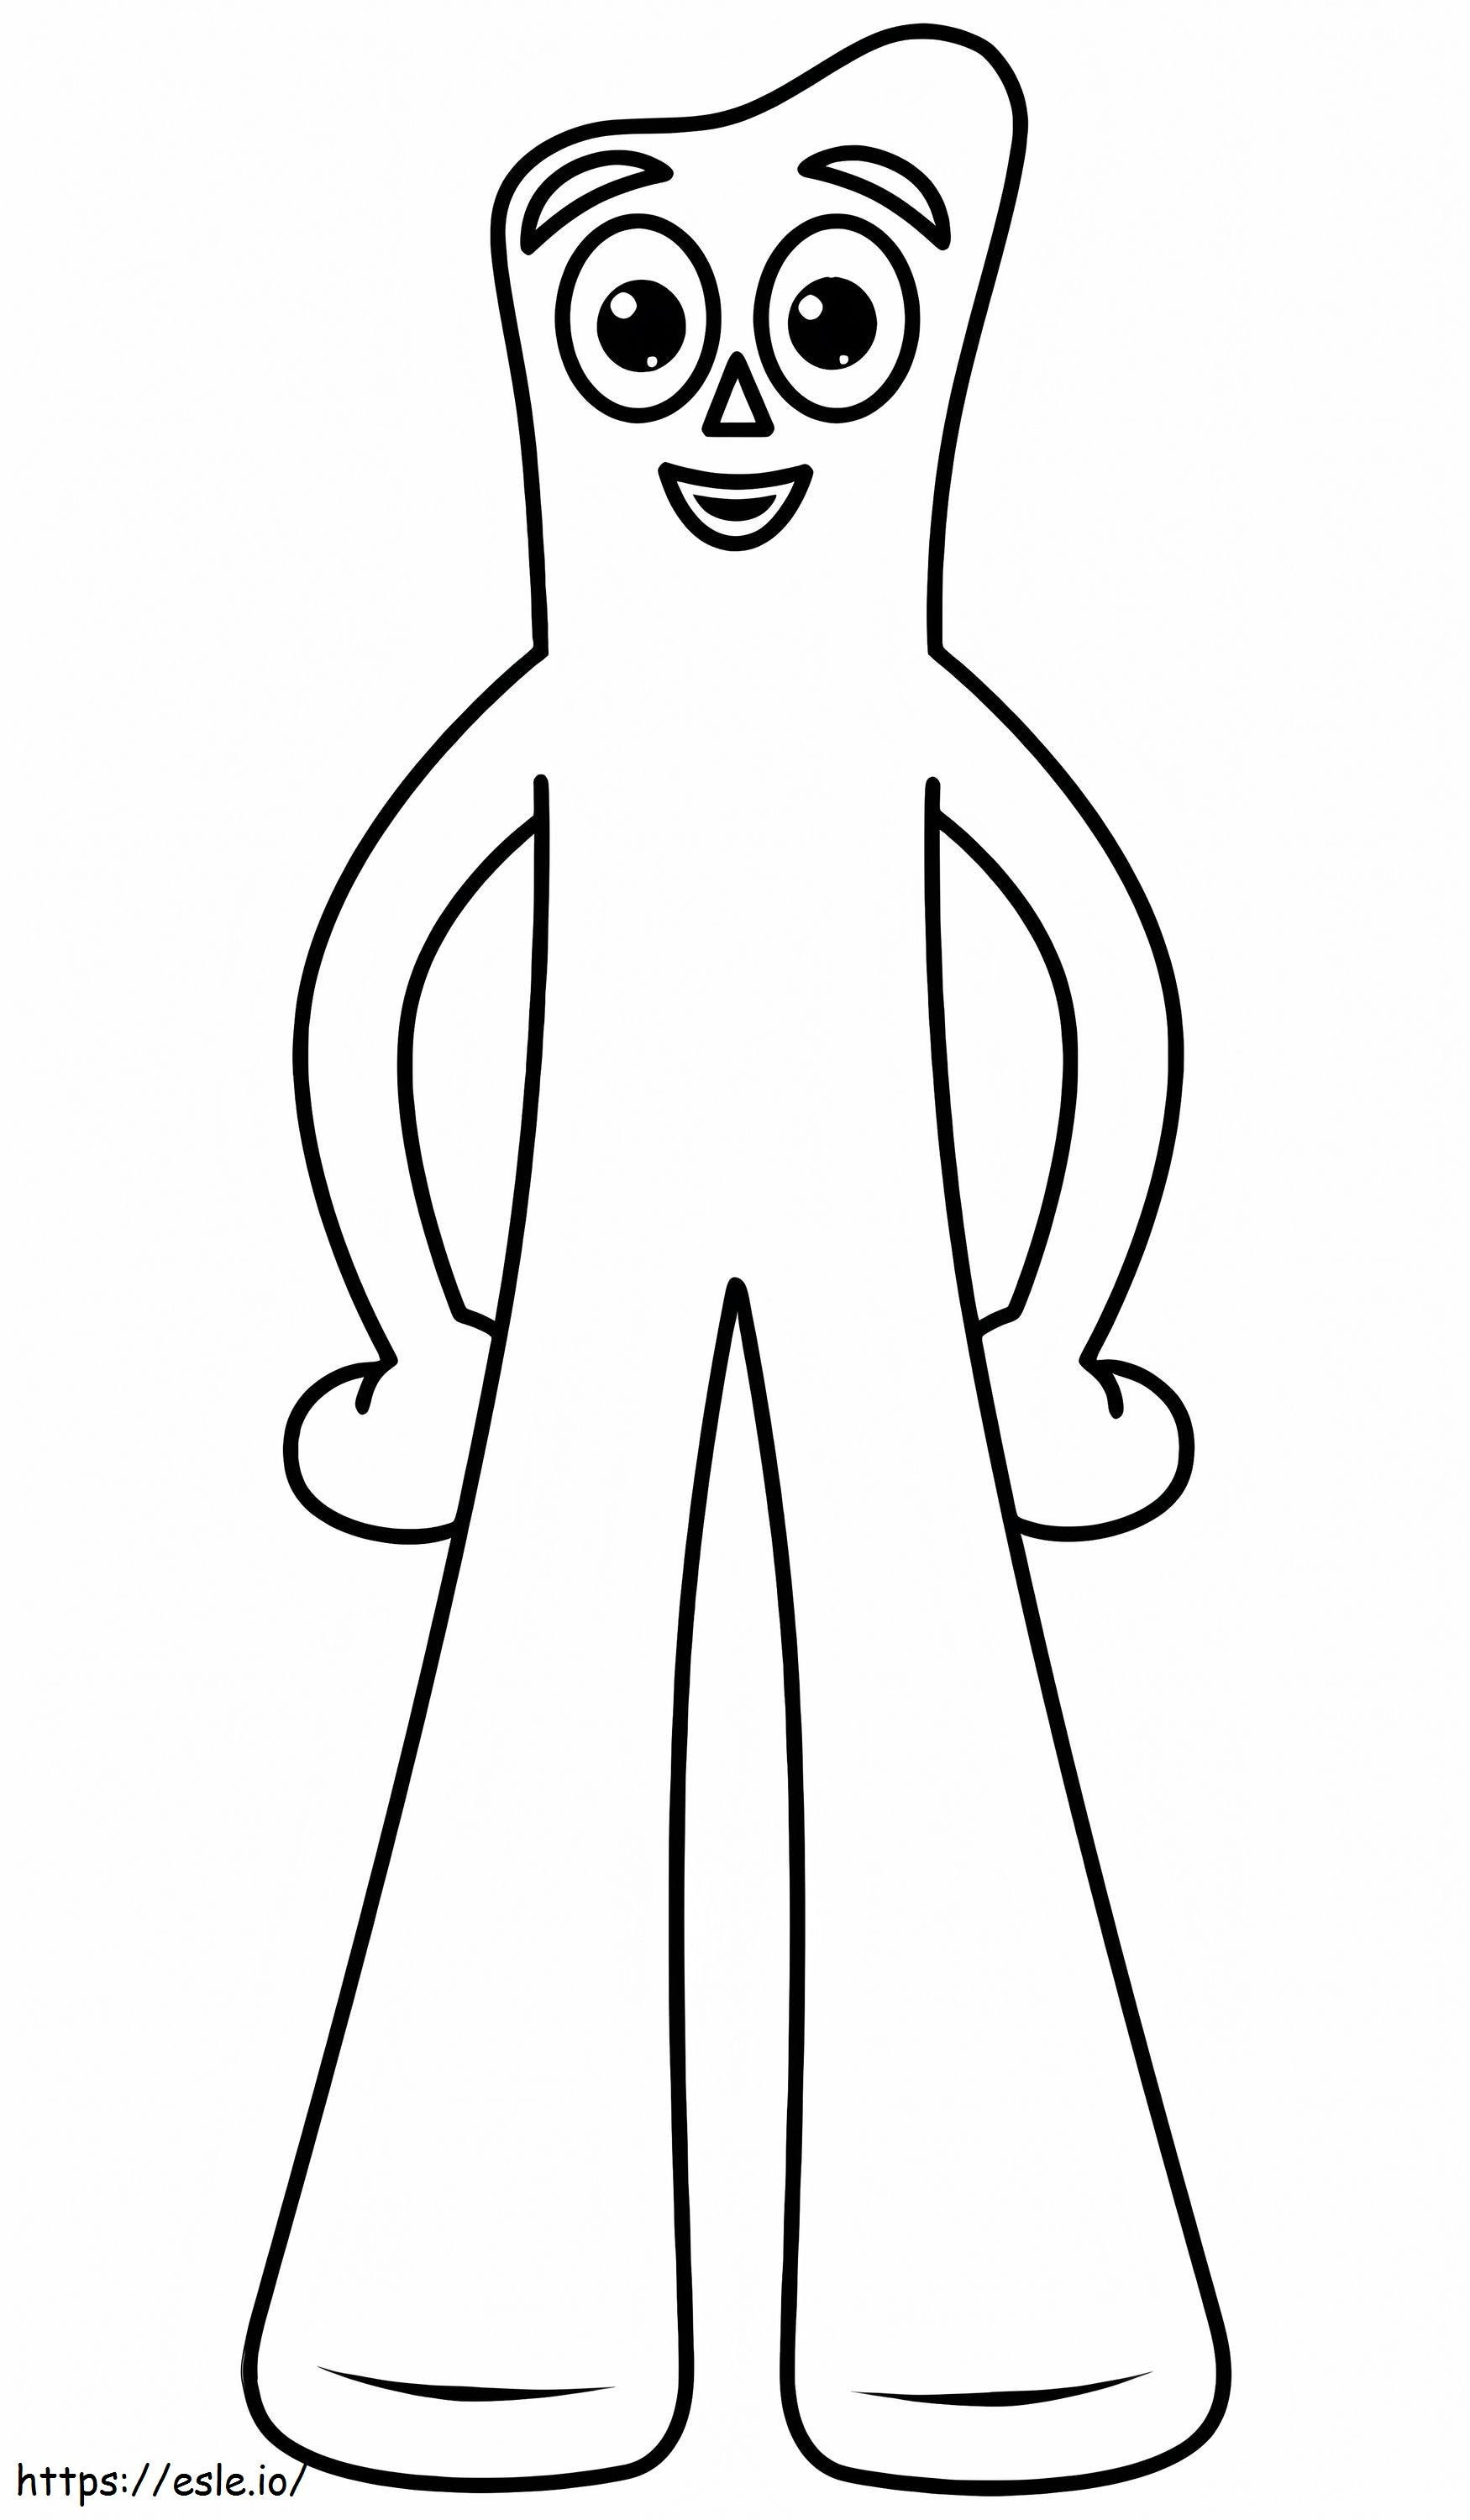 Cute Gumby coloring page